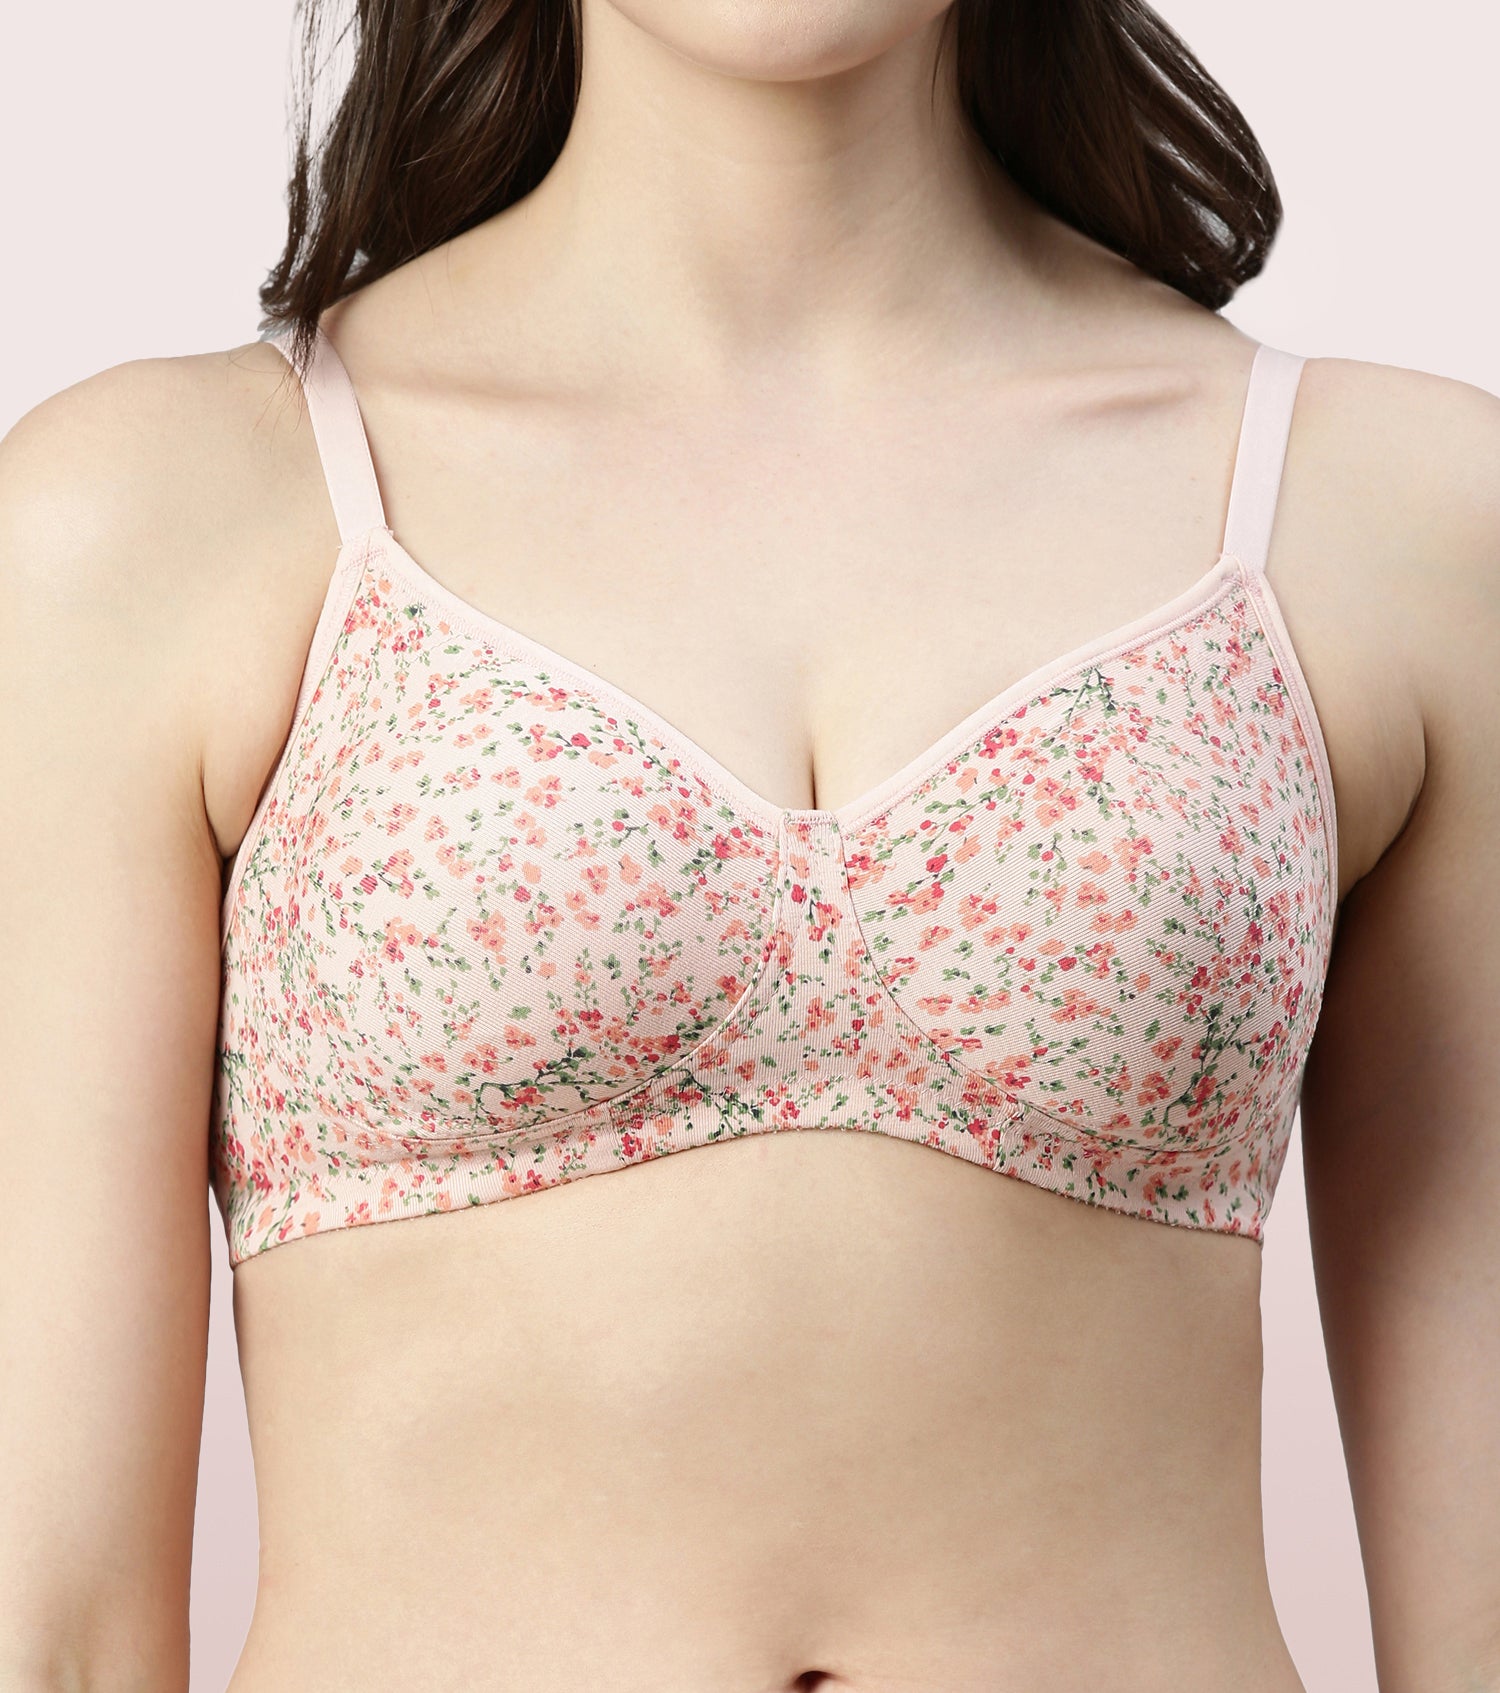 Buy Enamor Women's Cotton Non-Wired Padded Bra at